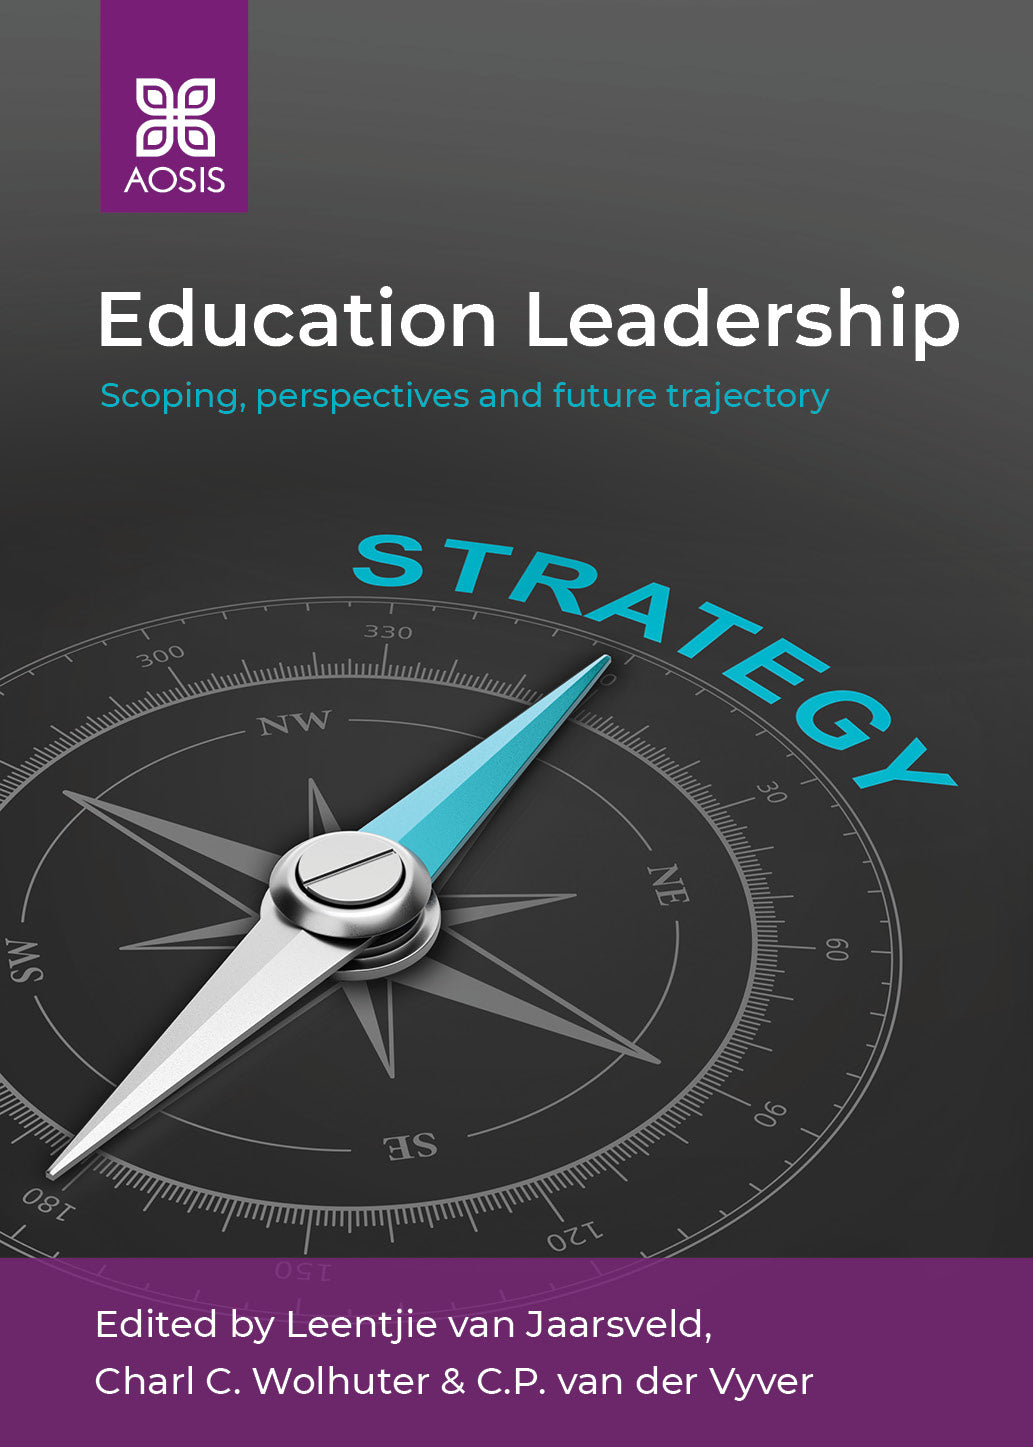 Education Leadership: Scoping, perspectives and future trajectory